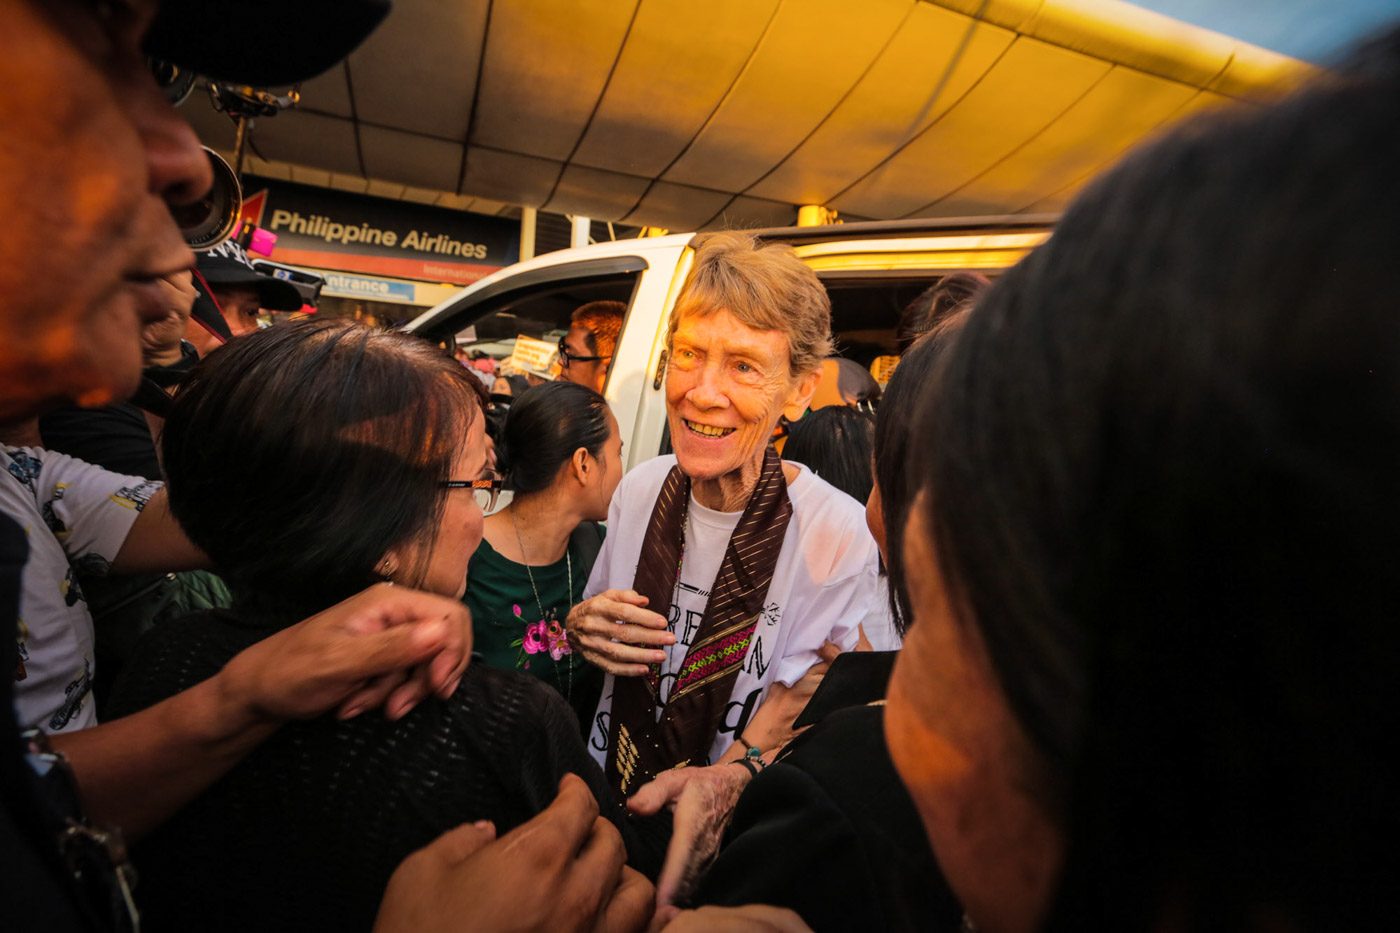 SEND-OFF. Australian nun Sister Patricia Fox arrives at the Philippines' Ninoy Aquino International Airport on November 3, 2018, as a huge crowd gathers to send her off. Photo by Jire Carreon/Rappler 